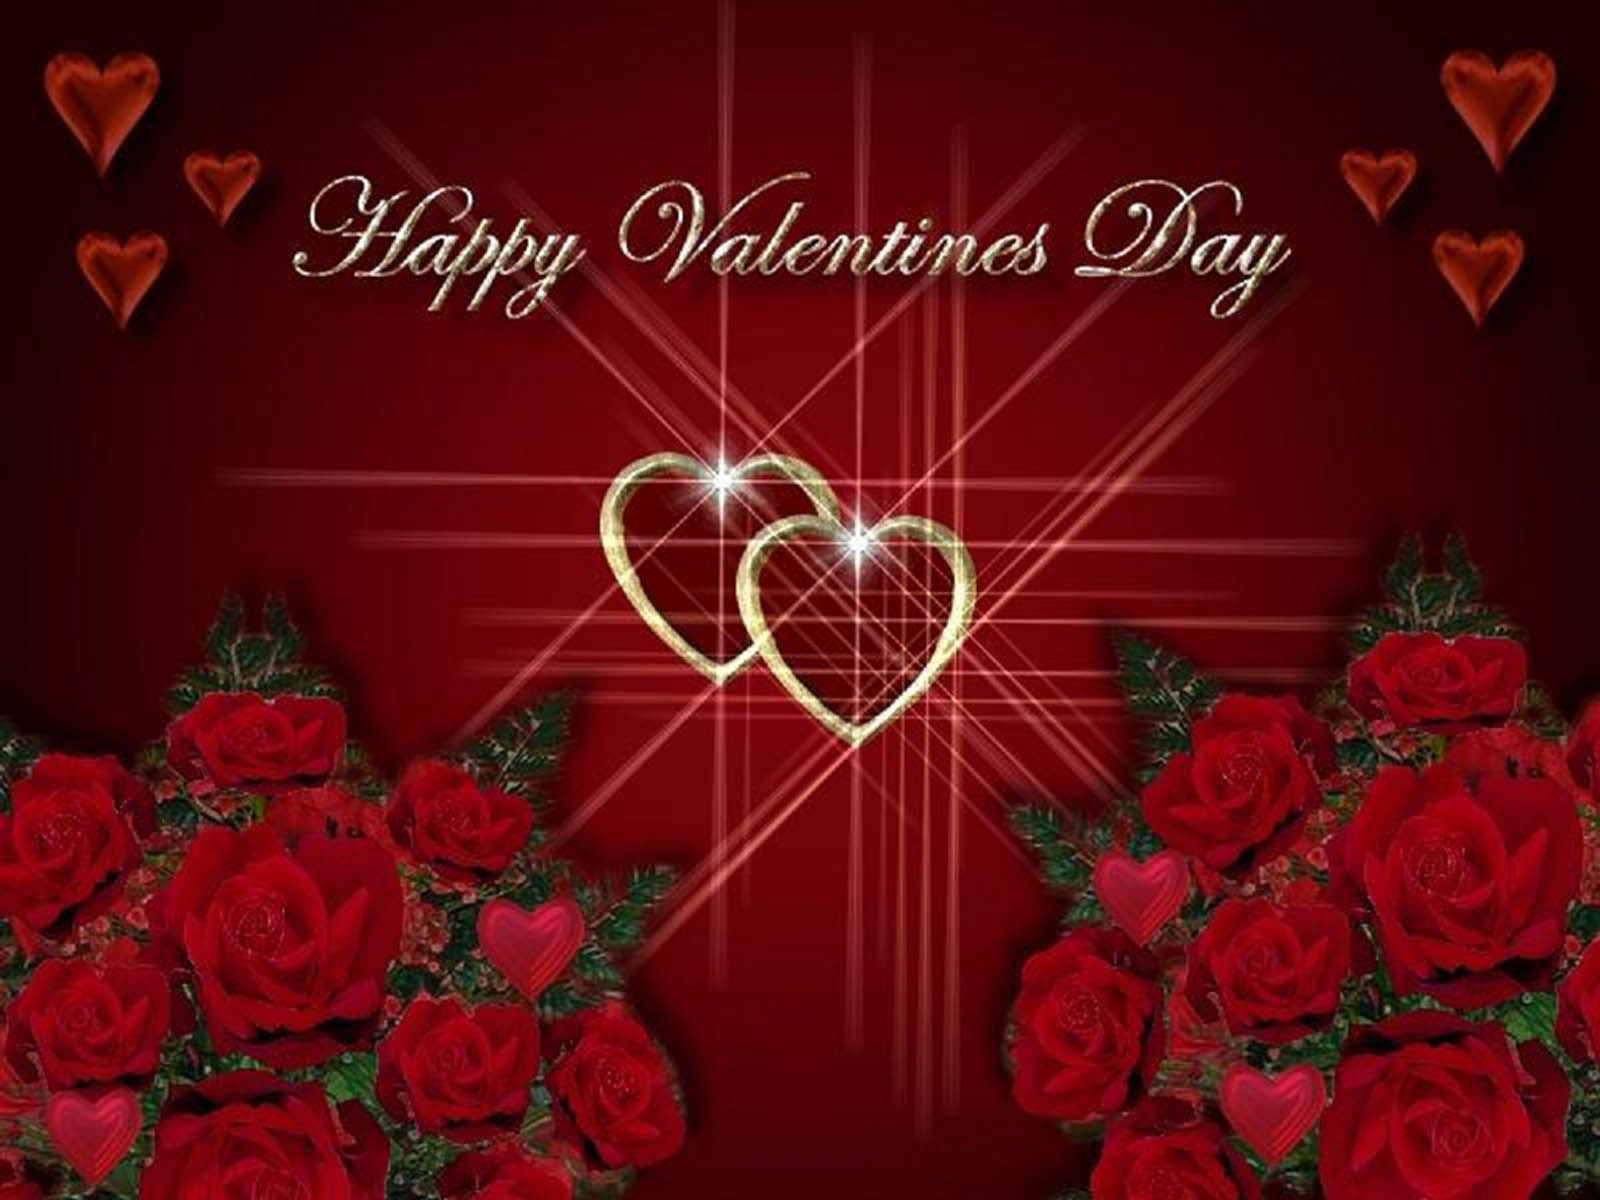 Desktop Background Valentines Day Photos Image And